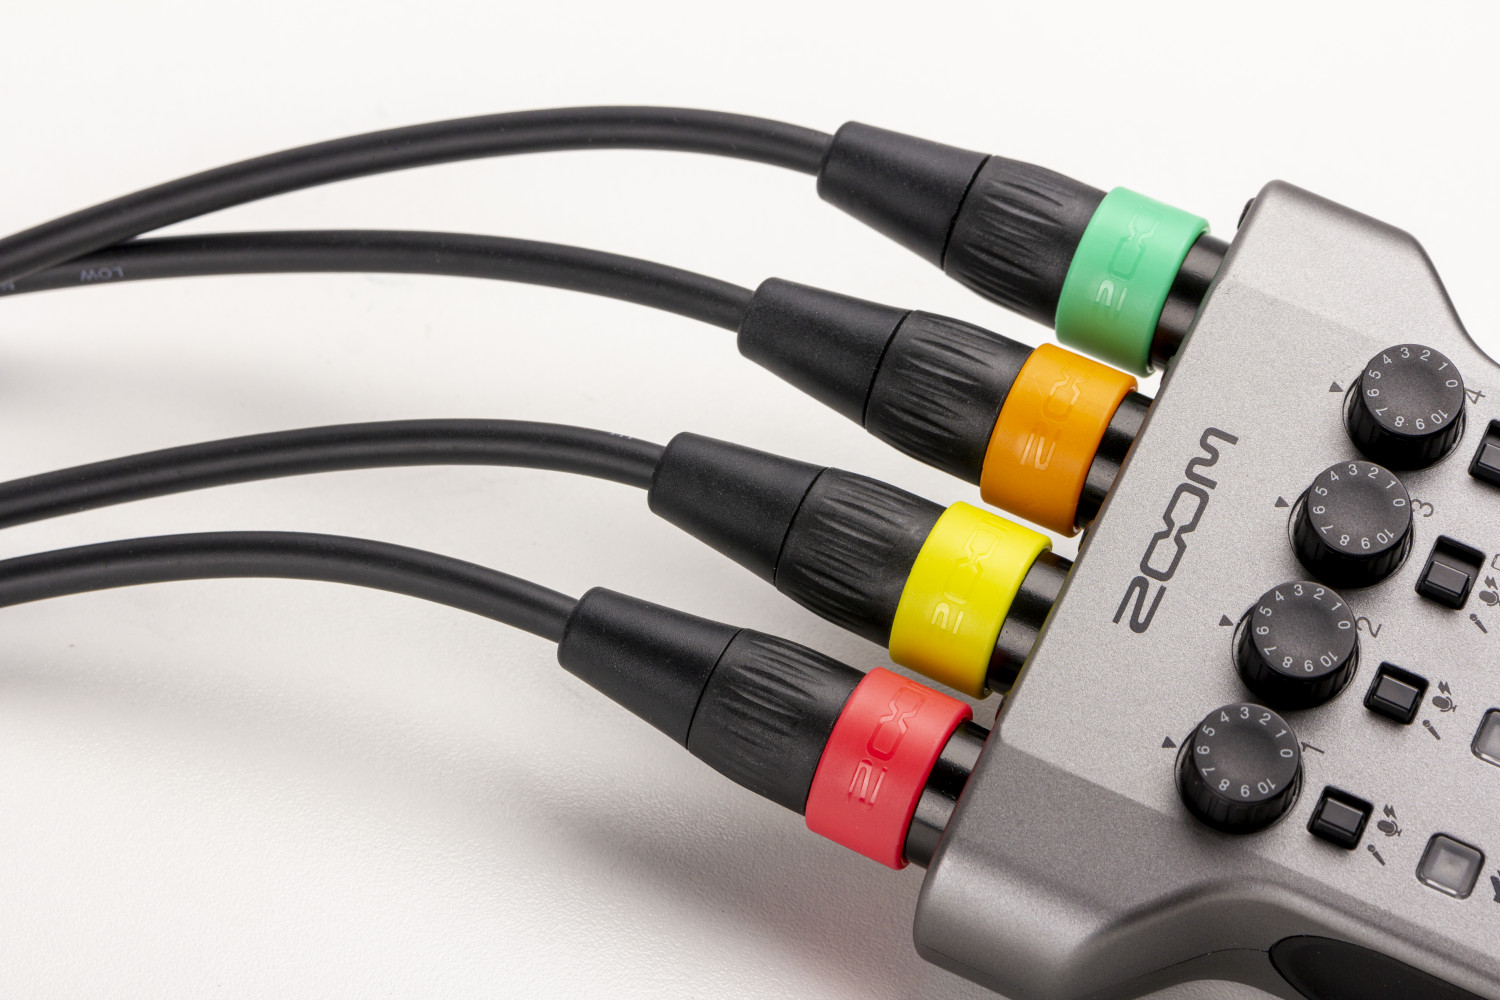 Zoom XLR-4c/CP XLR Mic Cables with Color Rings 4-Pack